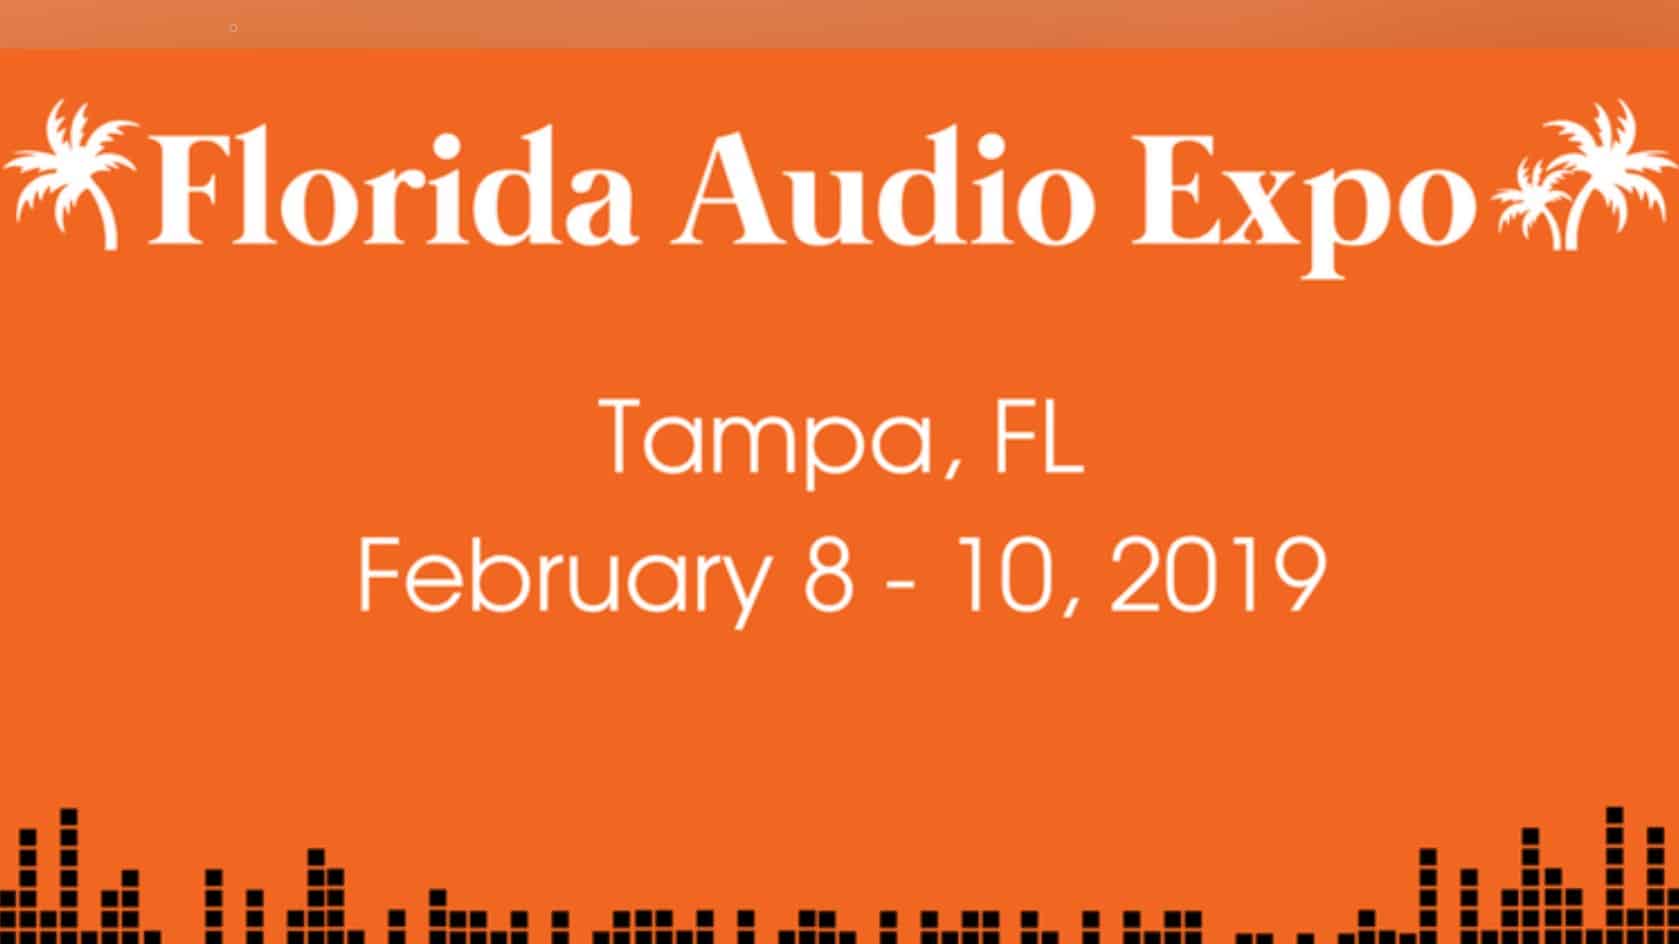 Qobuz is official streamer at Florida Audio Expo High Resolution Audio